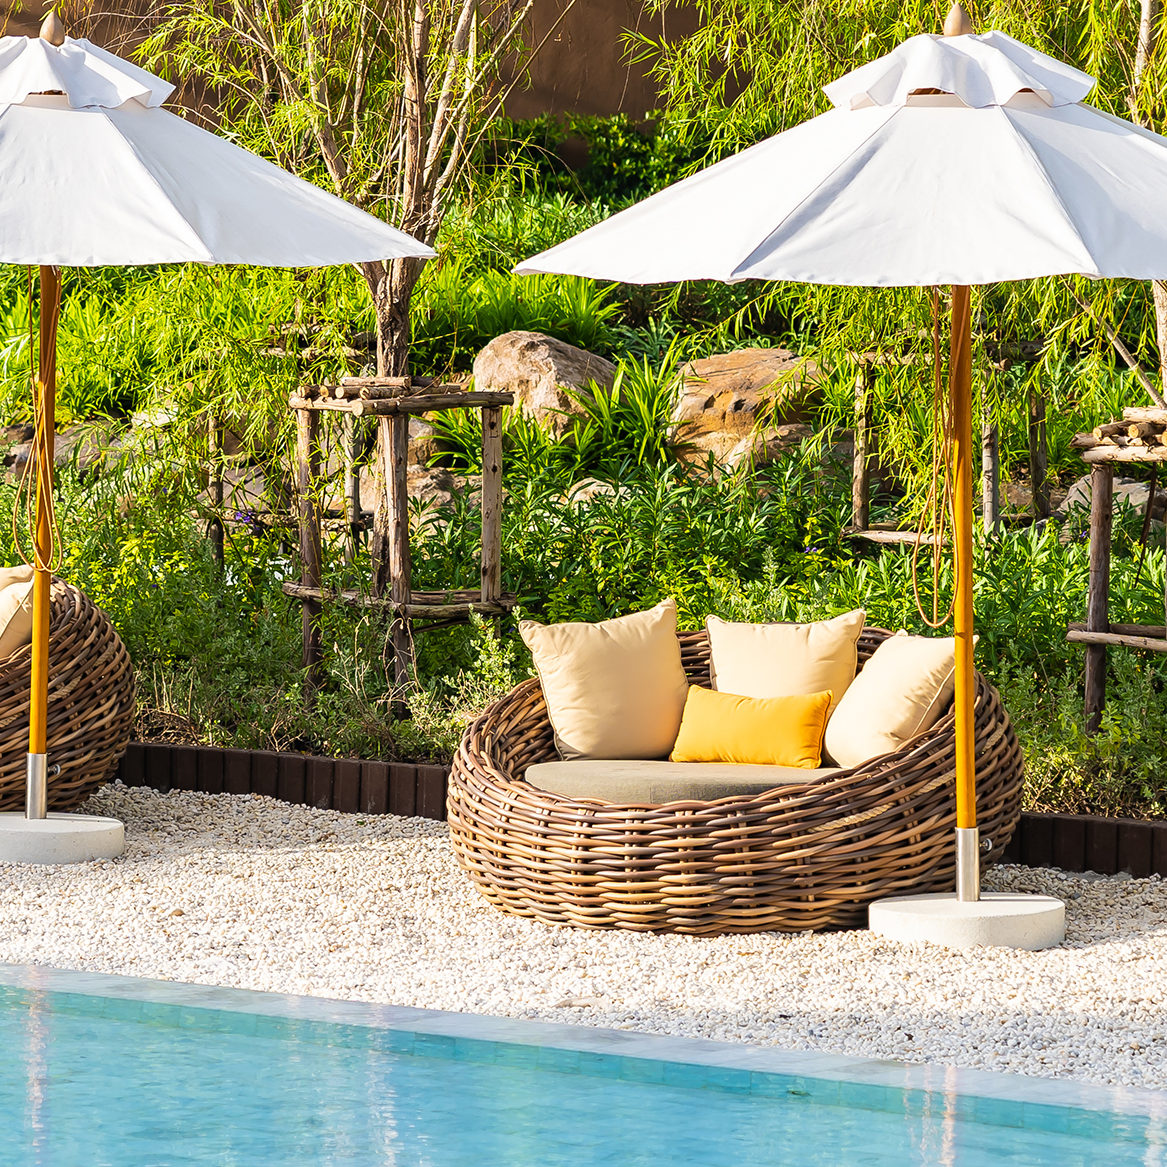 Umbrella and deck chair around outdoor swimming pool